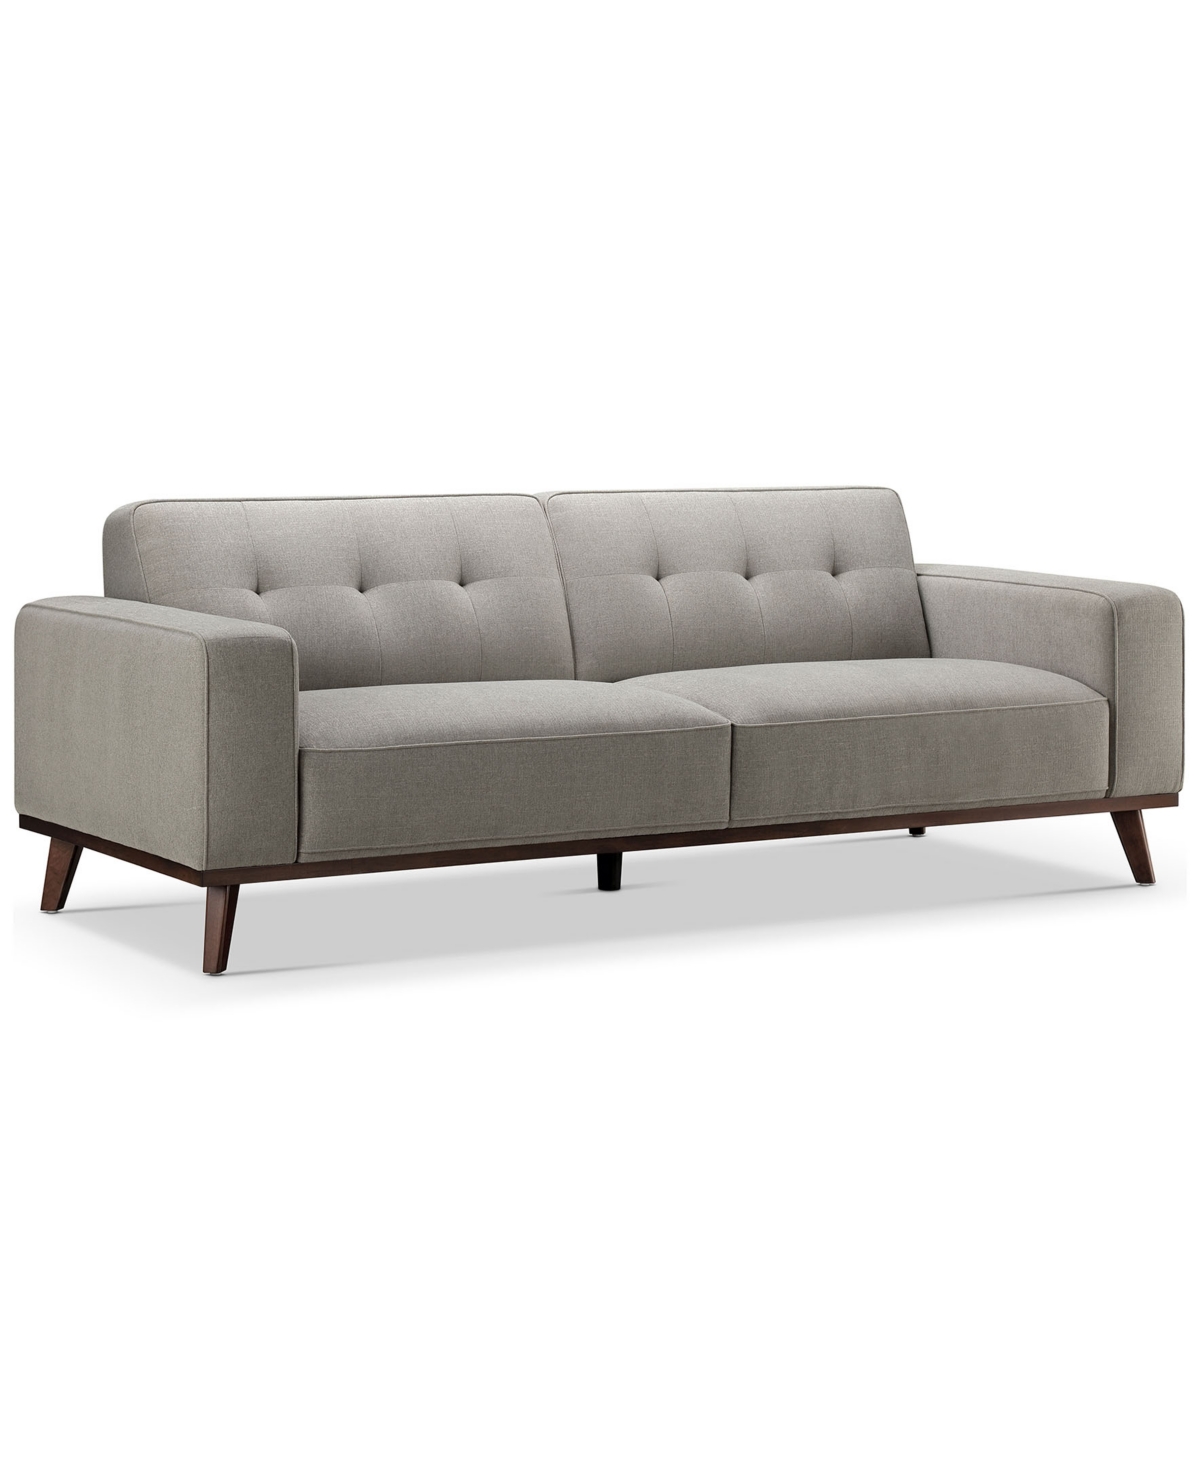 Abbyson Living Vicenza 84" Mid-century Upholstered Sofa In Gray